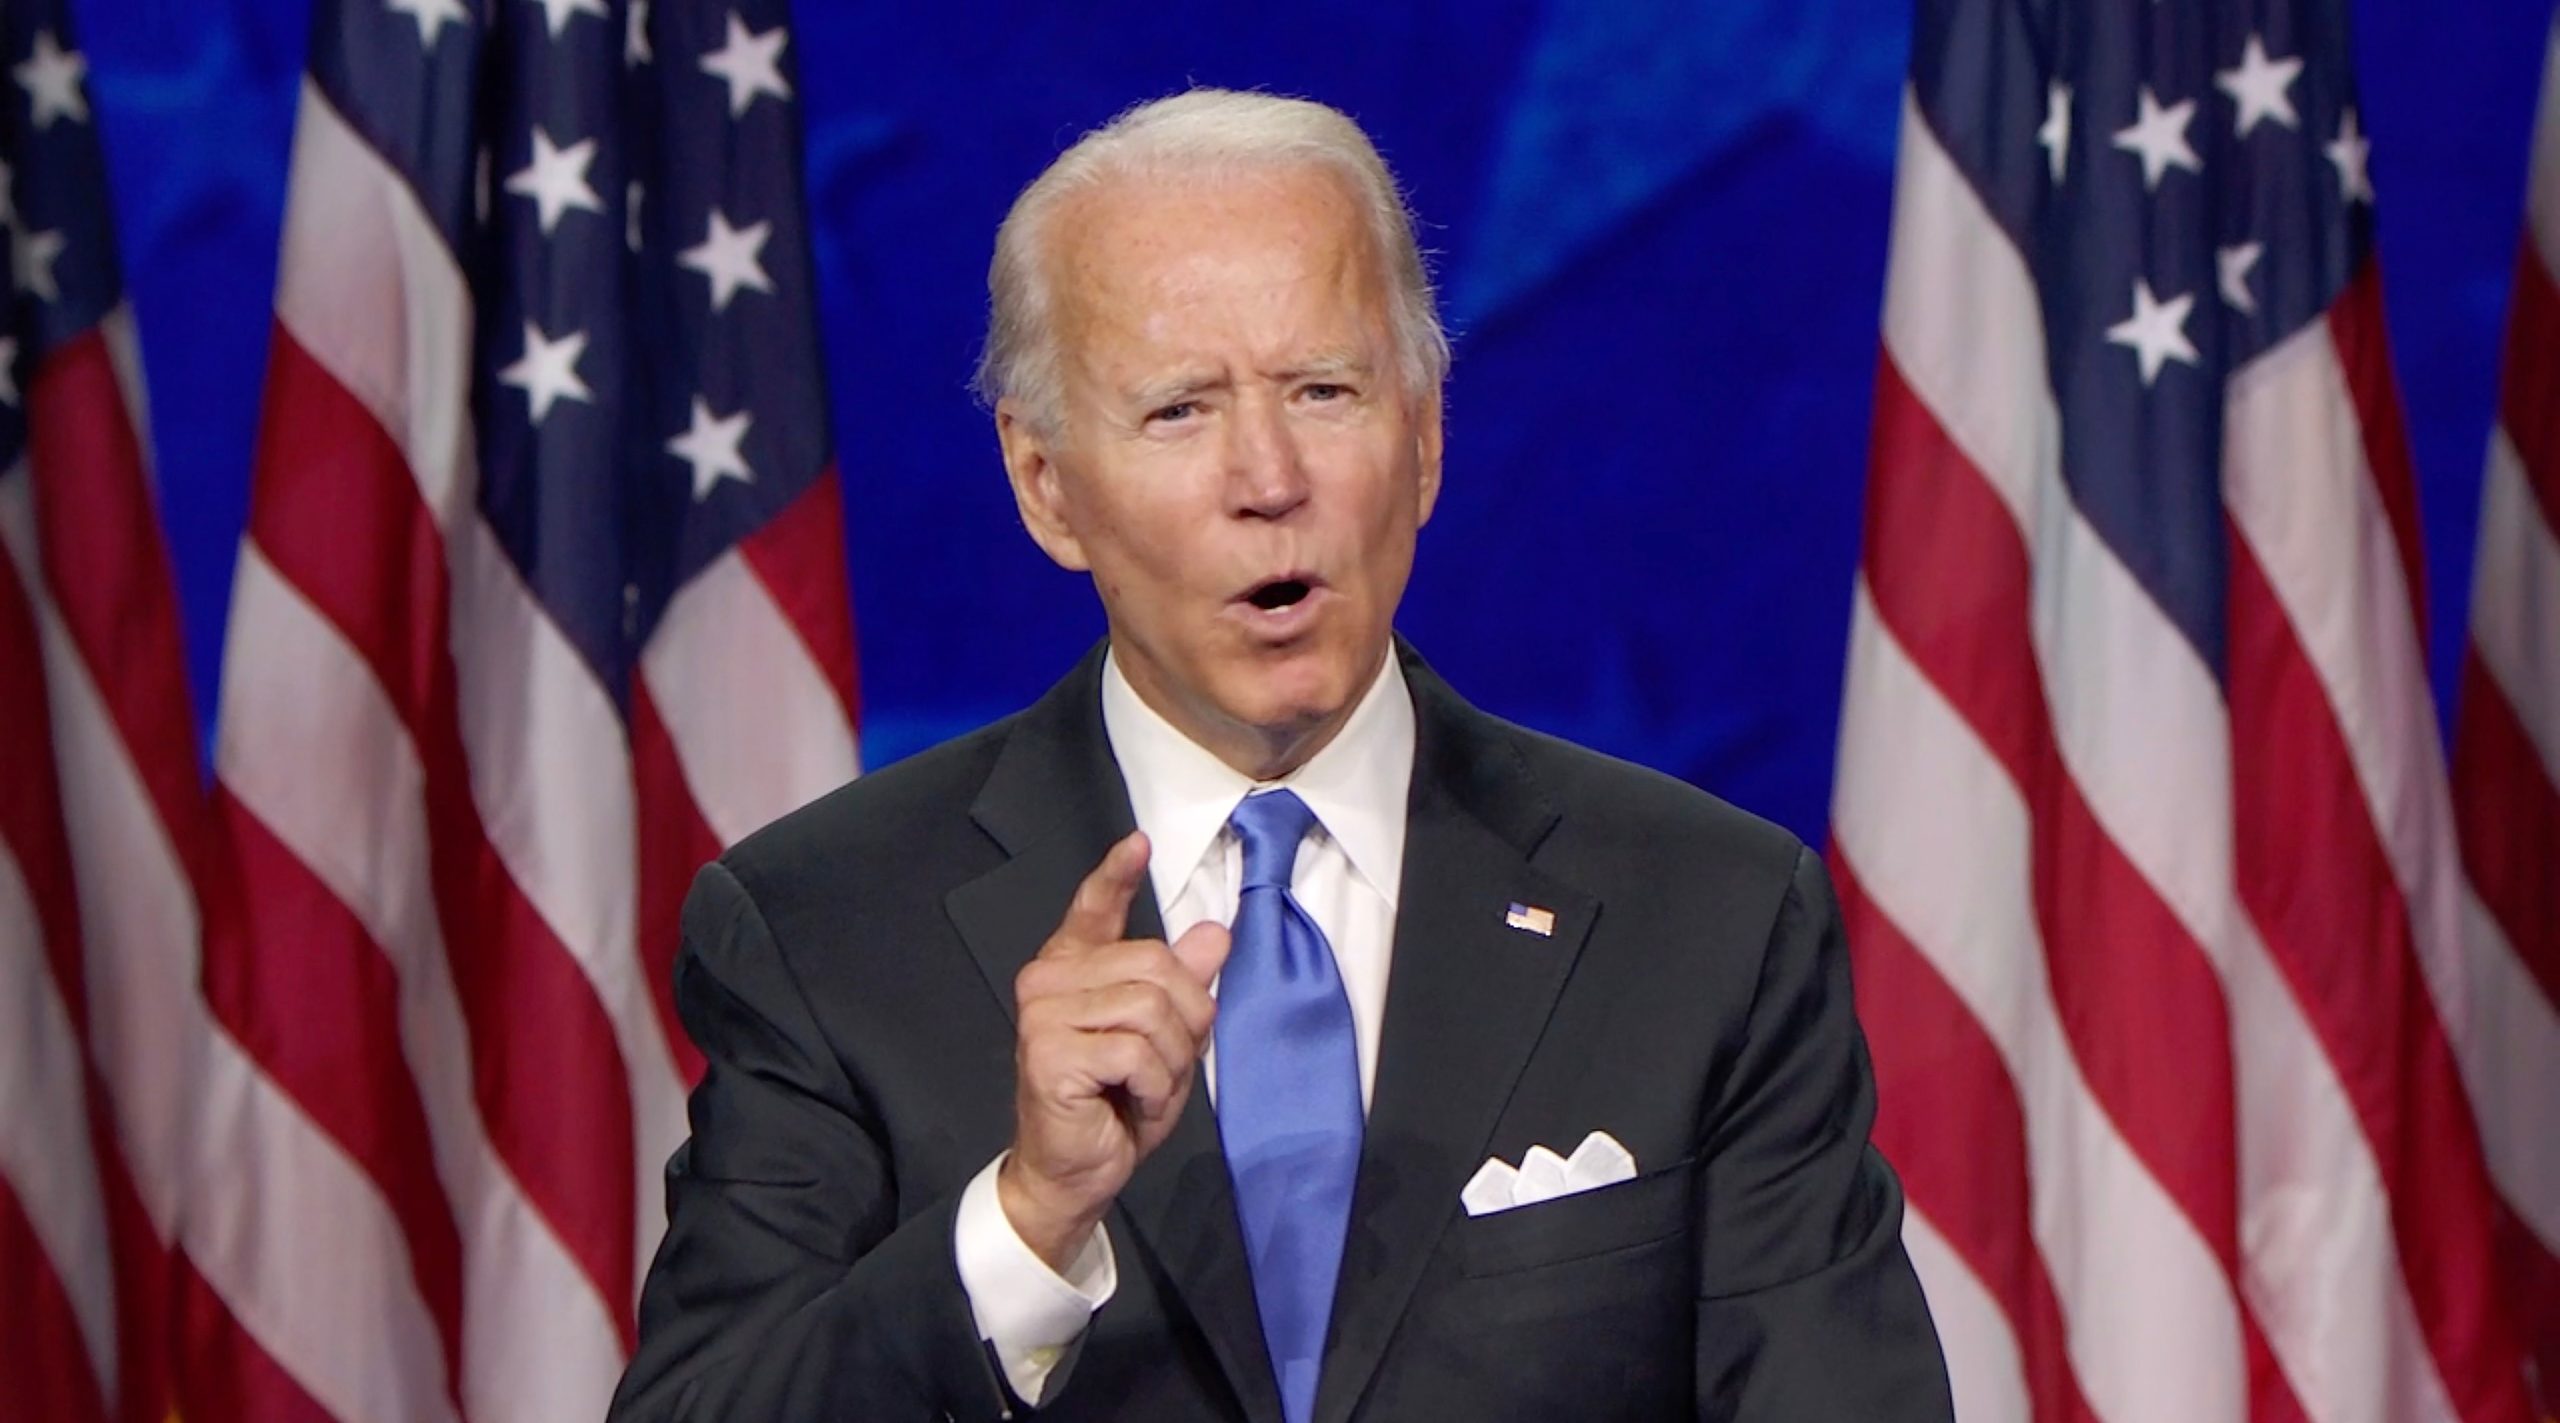 Biden speaking at the Democratic National Convention Committee livestream